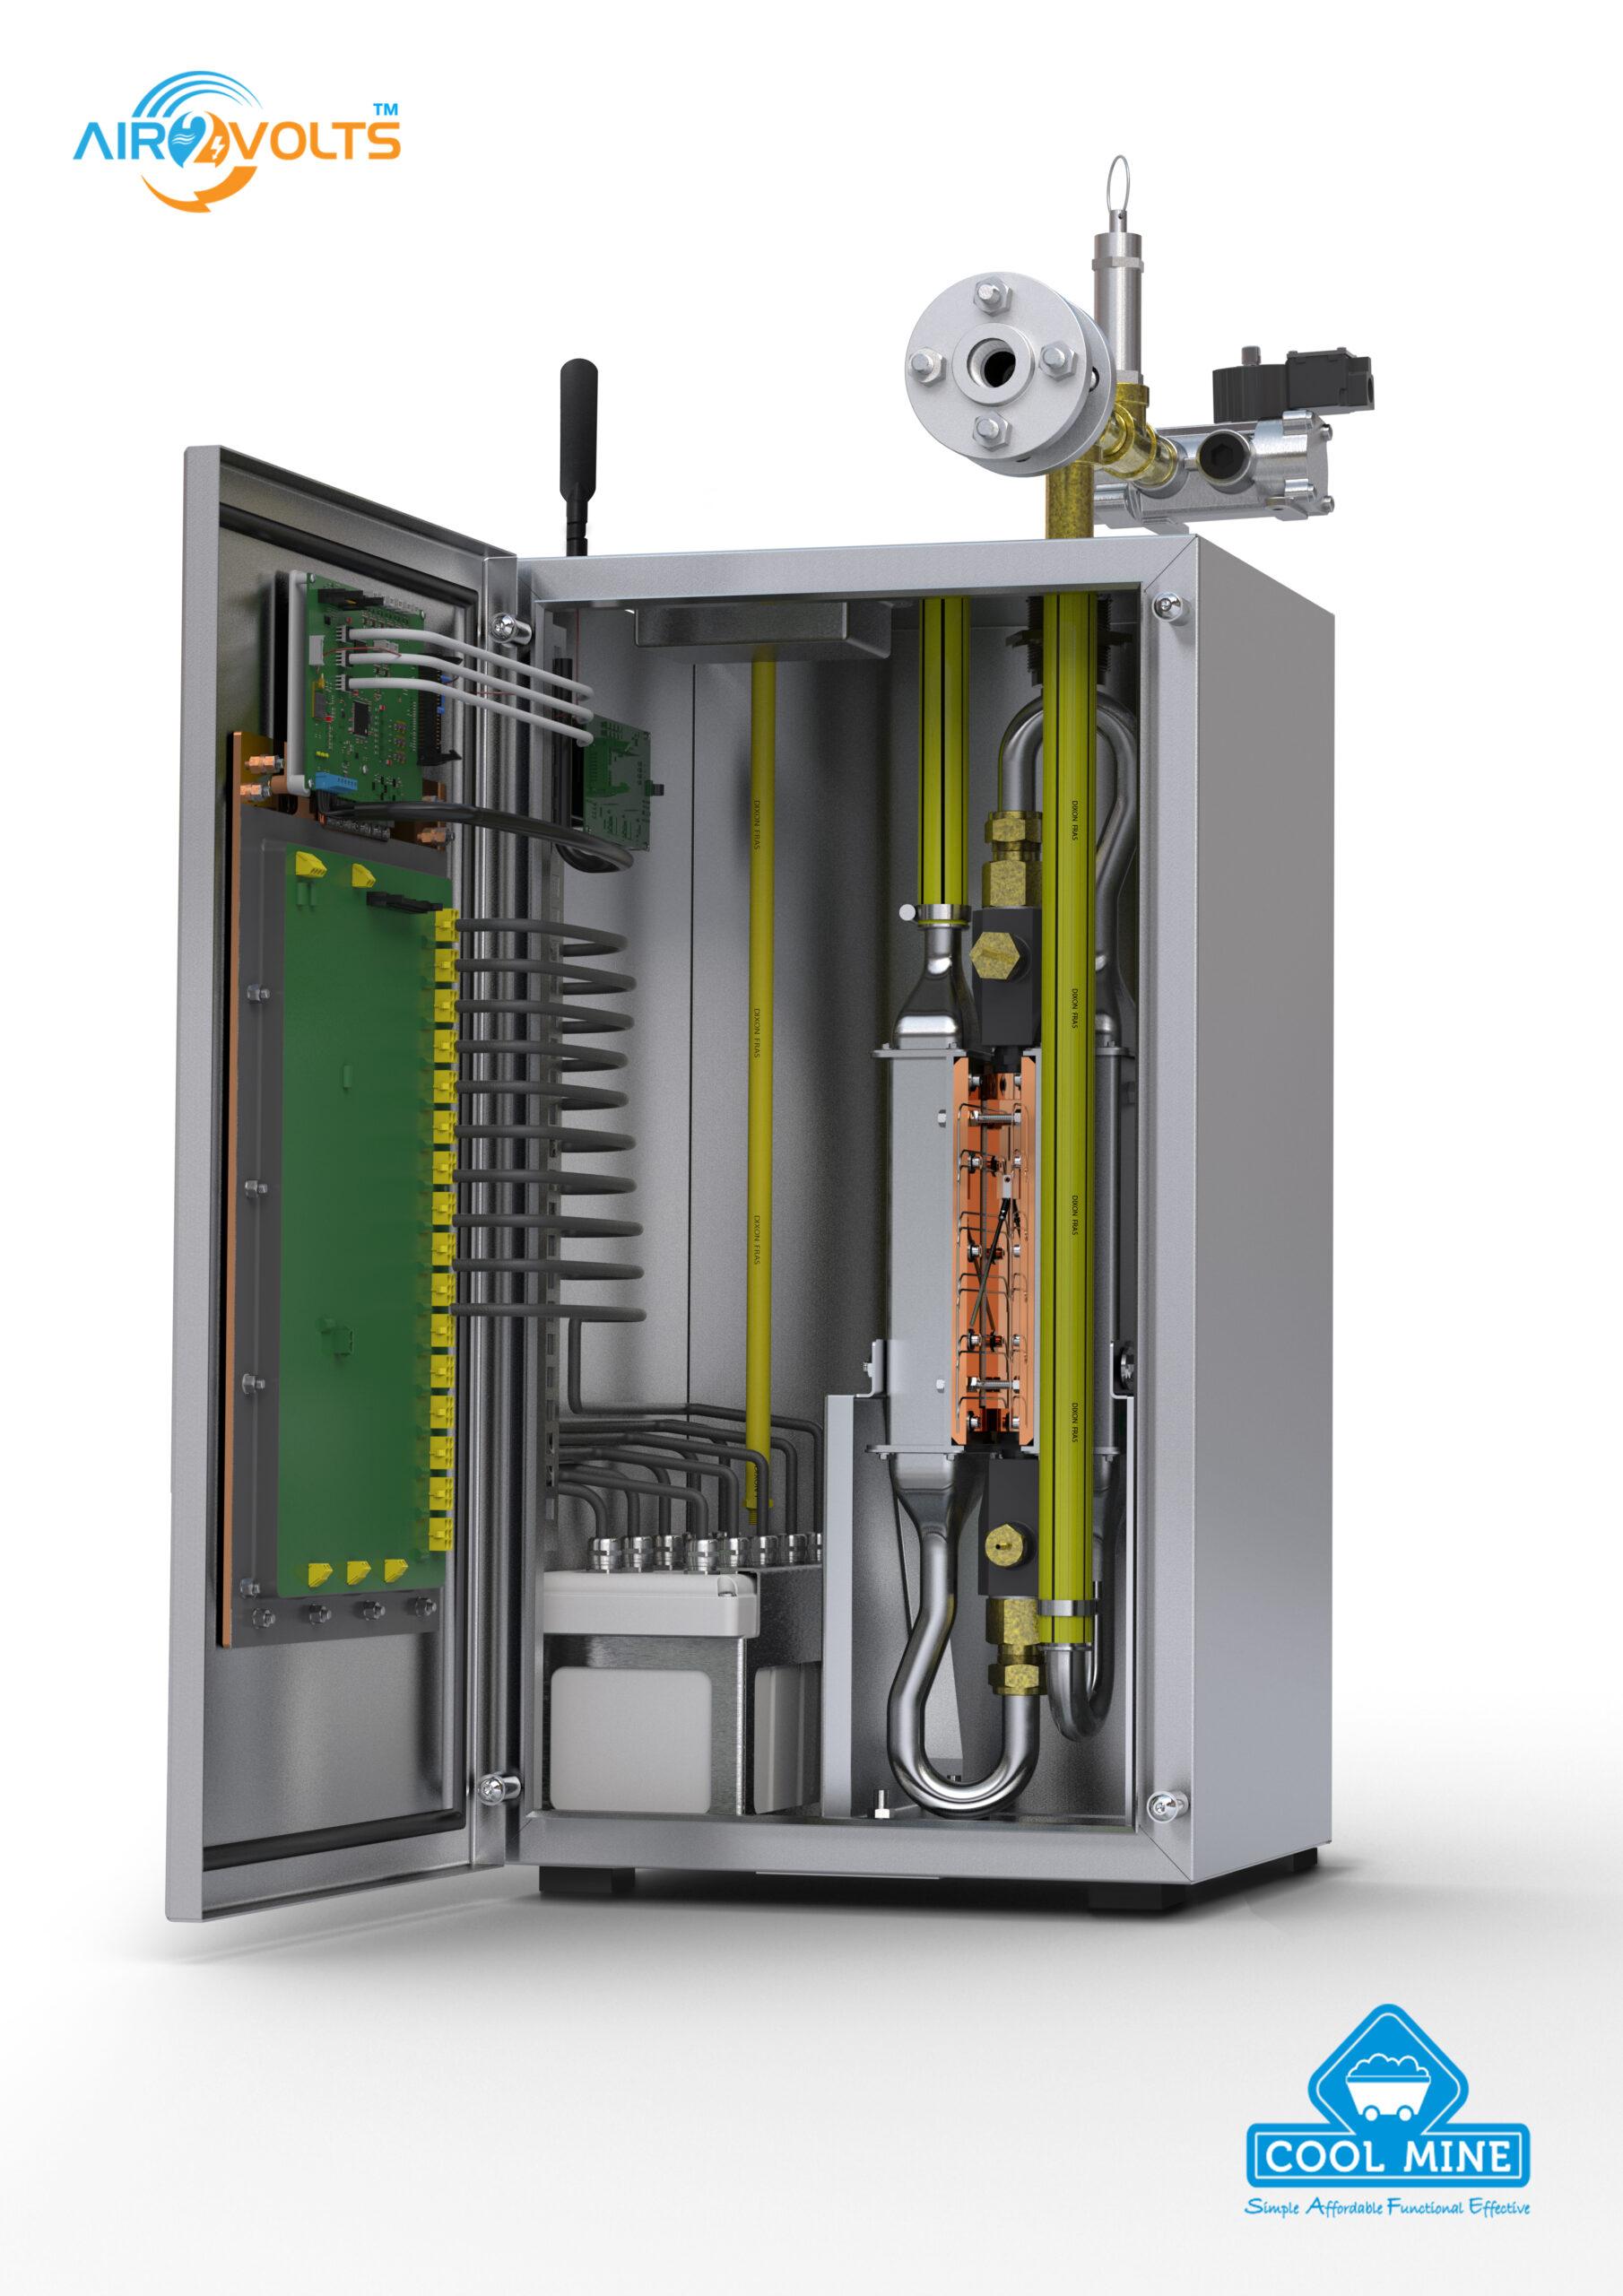 Product AIR2VOLTS - Generating Intrinsically Safe Uninterruptible Power From An Underground Coal Mine's Compressed Air Service. - Cool Mine image